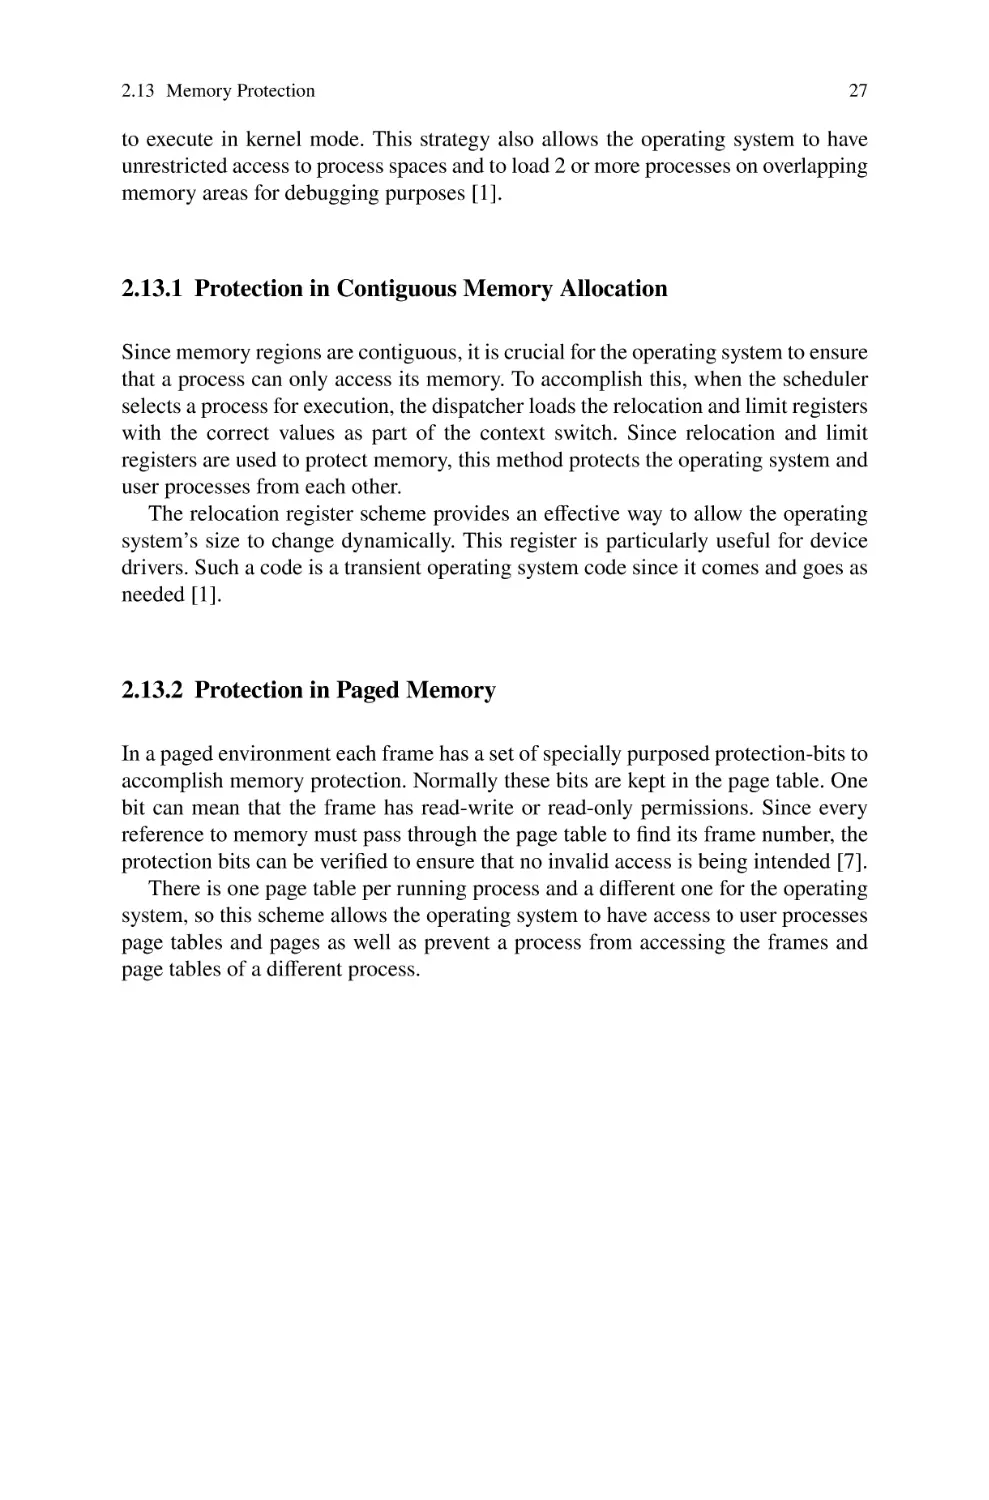 2.13.1 Protection in Contiguous Memory Allocation
2.13.2 Protection in Paged Memory